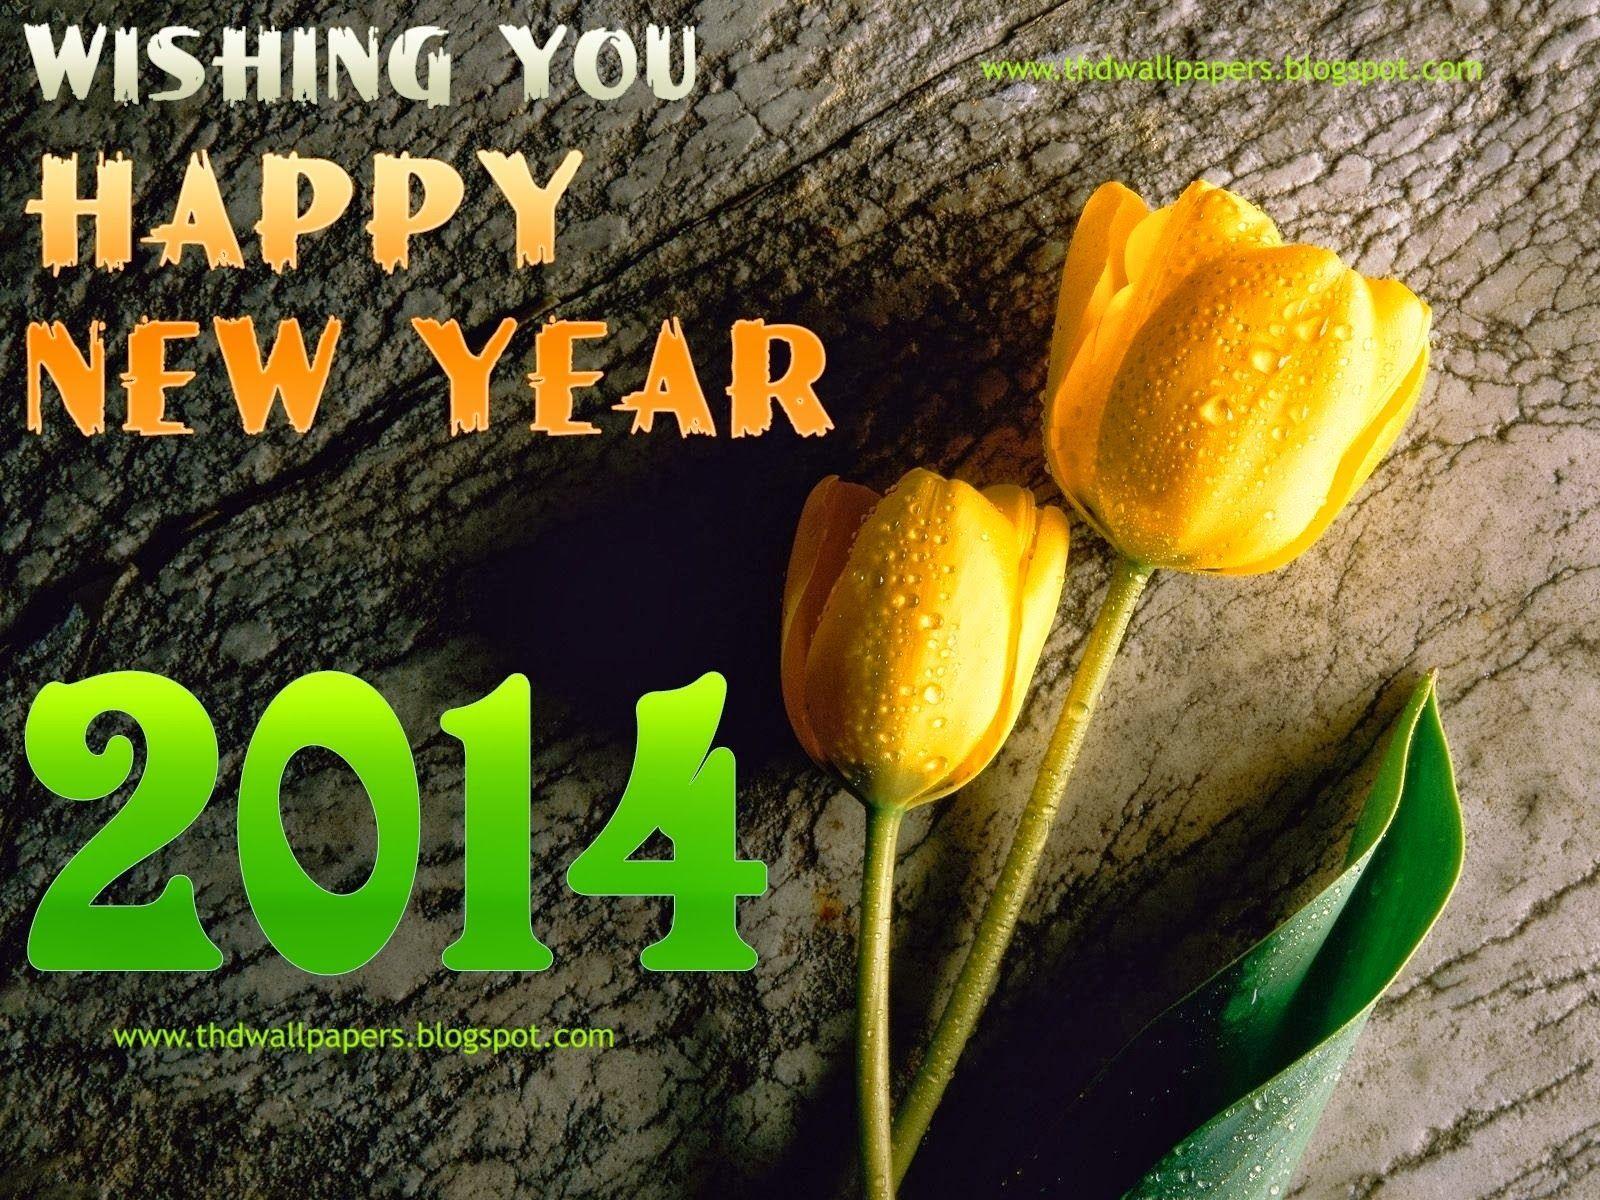 Happy New Year Wishes Greetings Photo Cards Wallpaper 2014